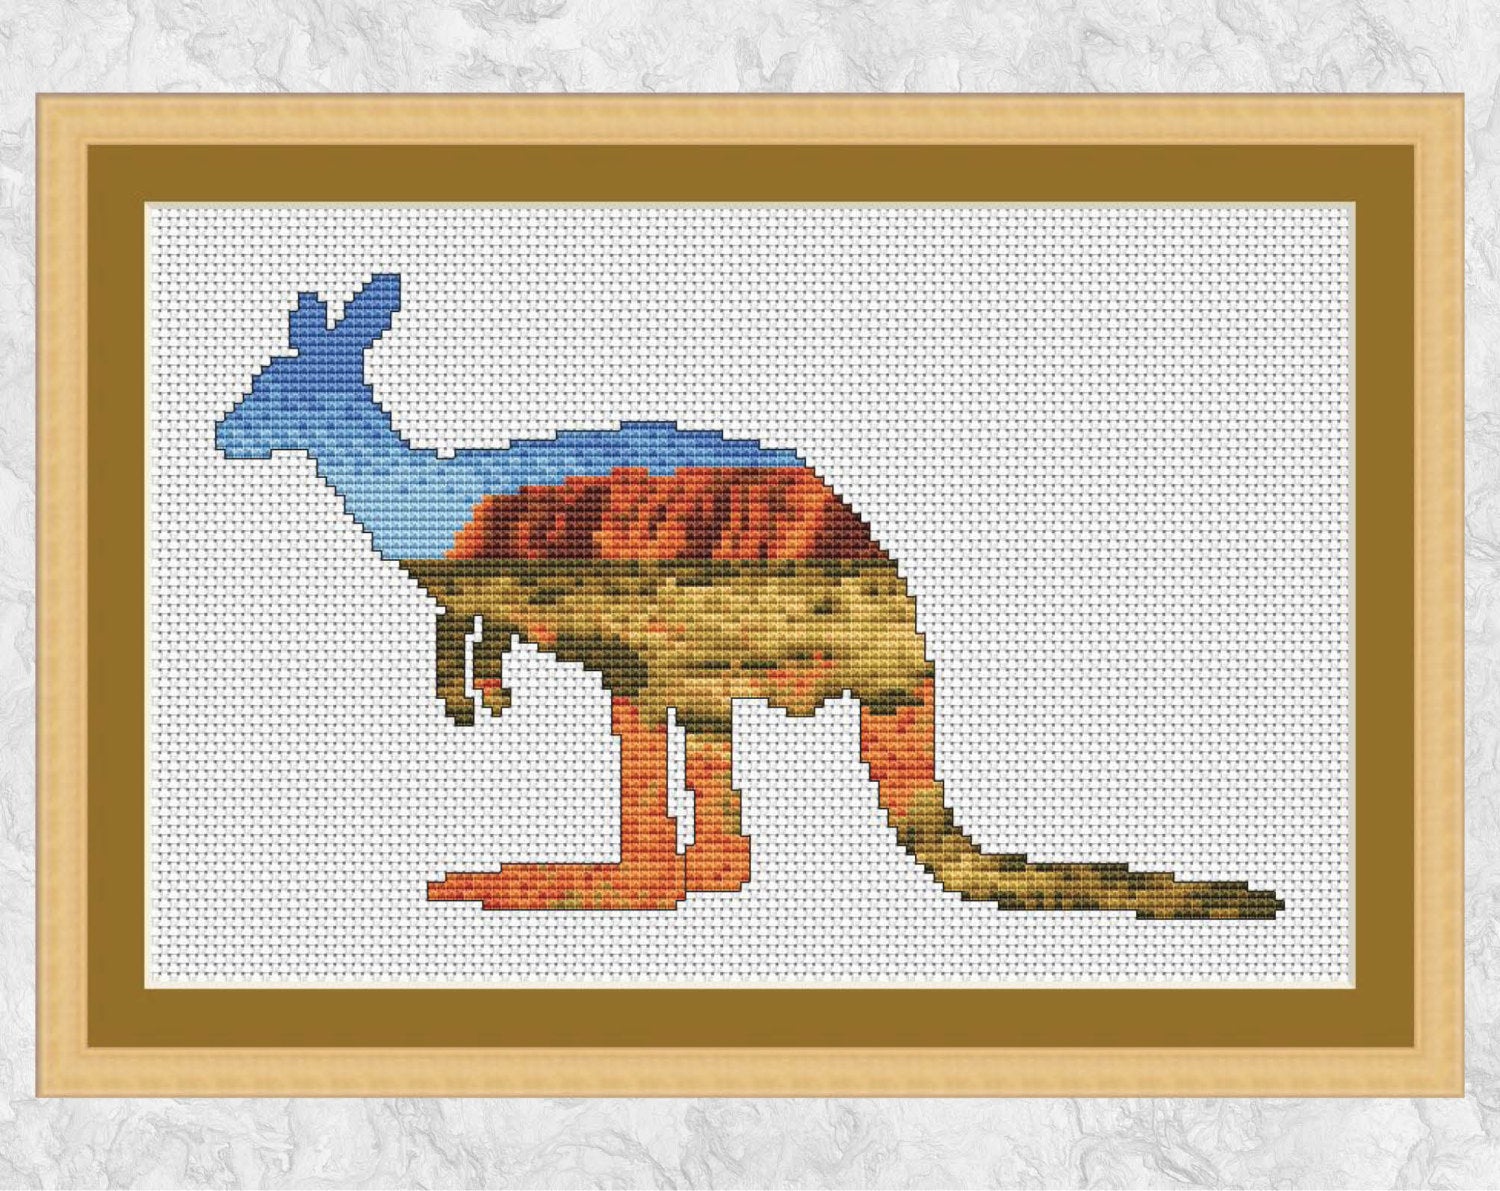 Cross stitch pattern of the silhouette of a Kangaroo filled with a view across the Australian outback to Uluru (Ayers Rock). Shown with frame.